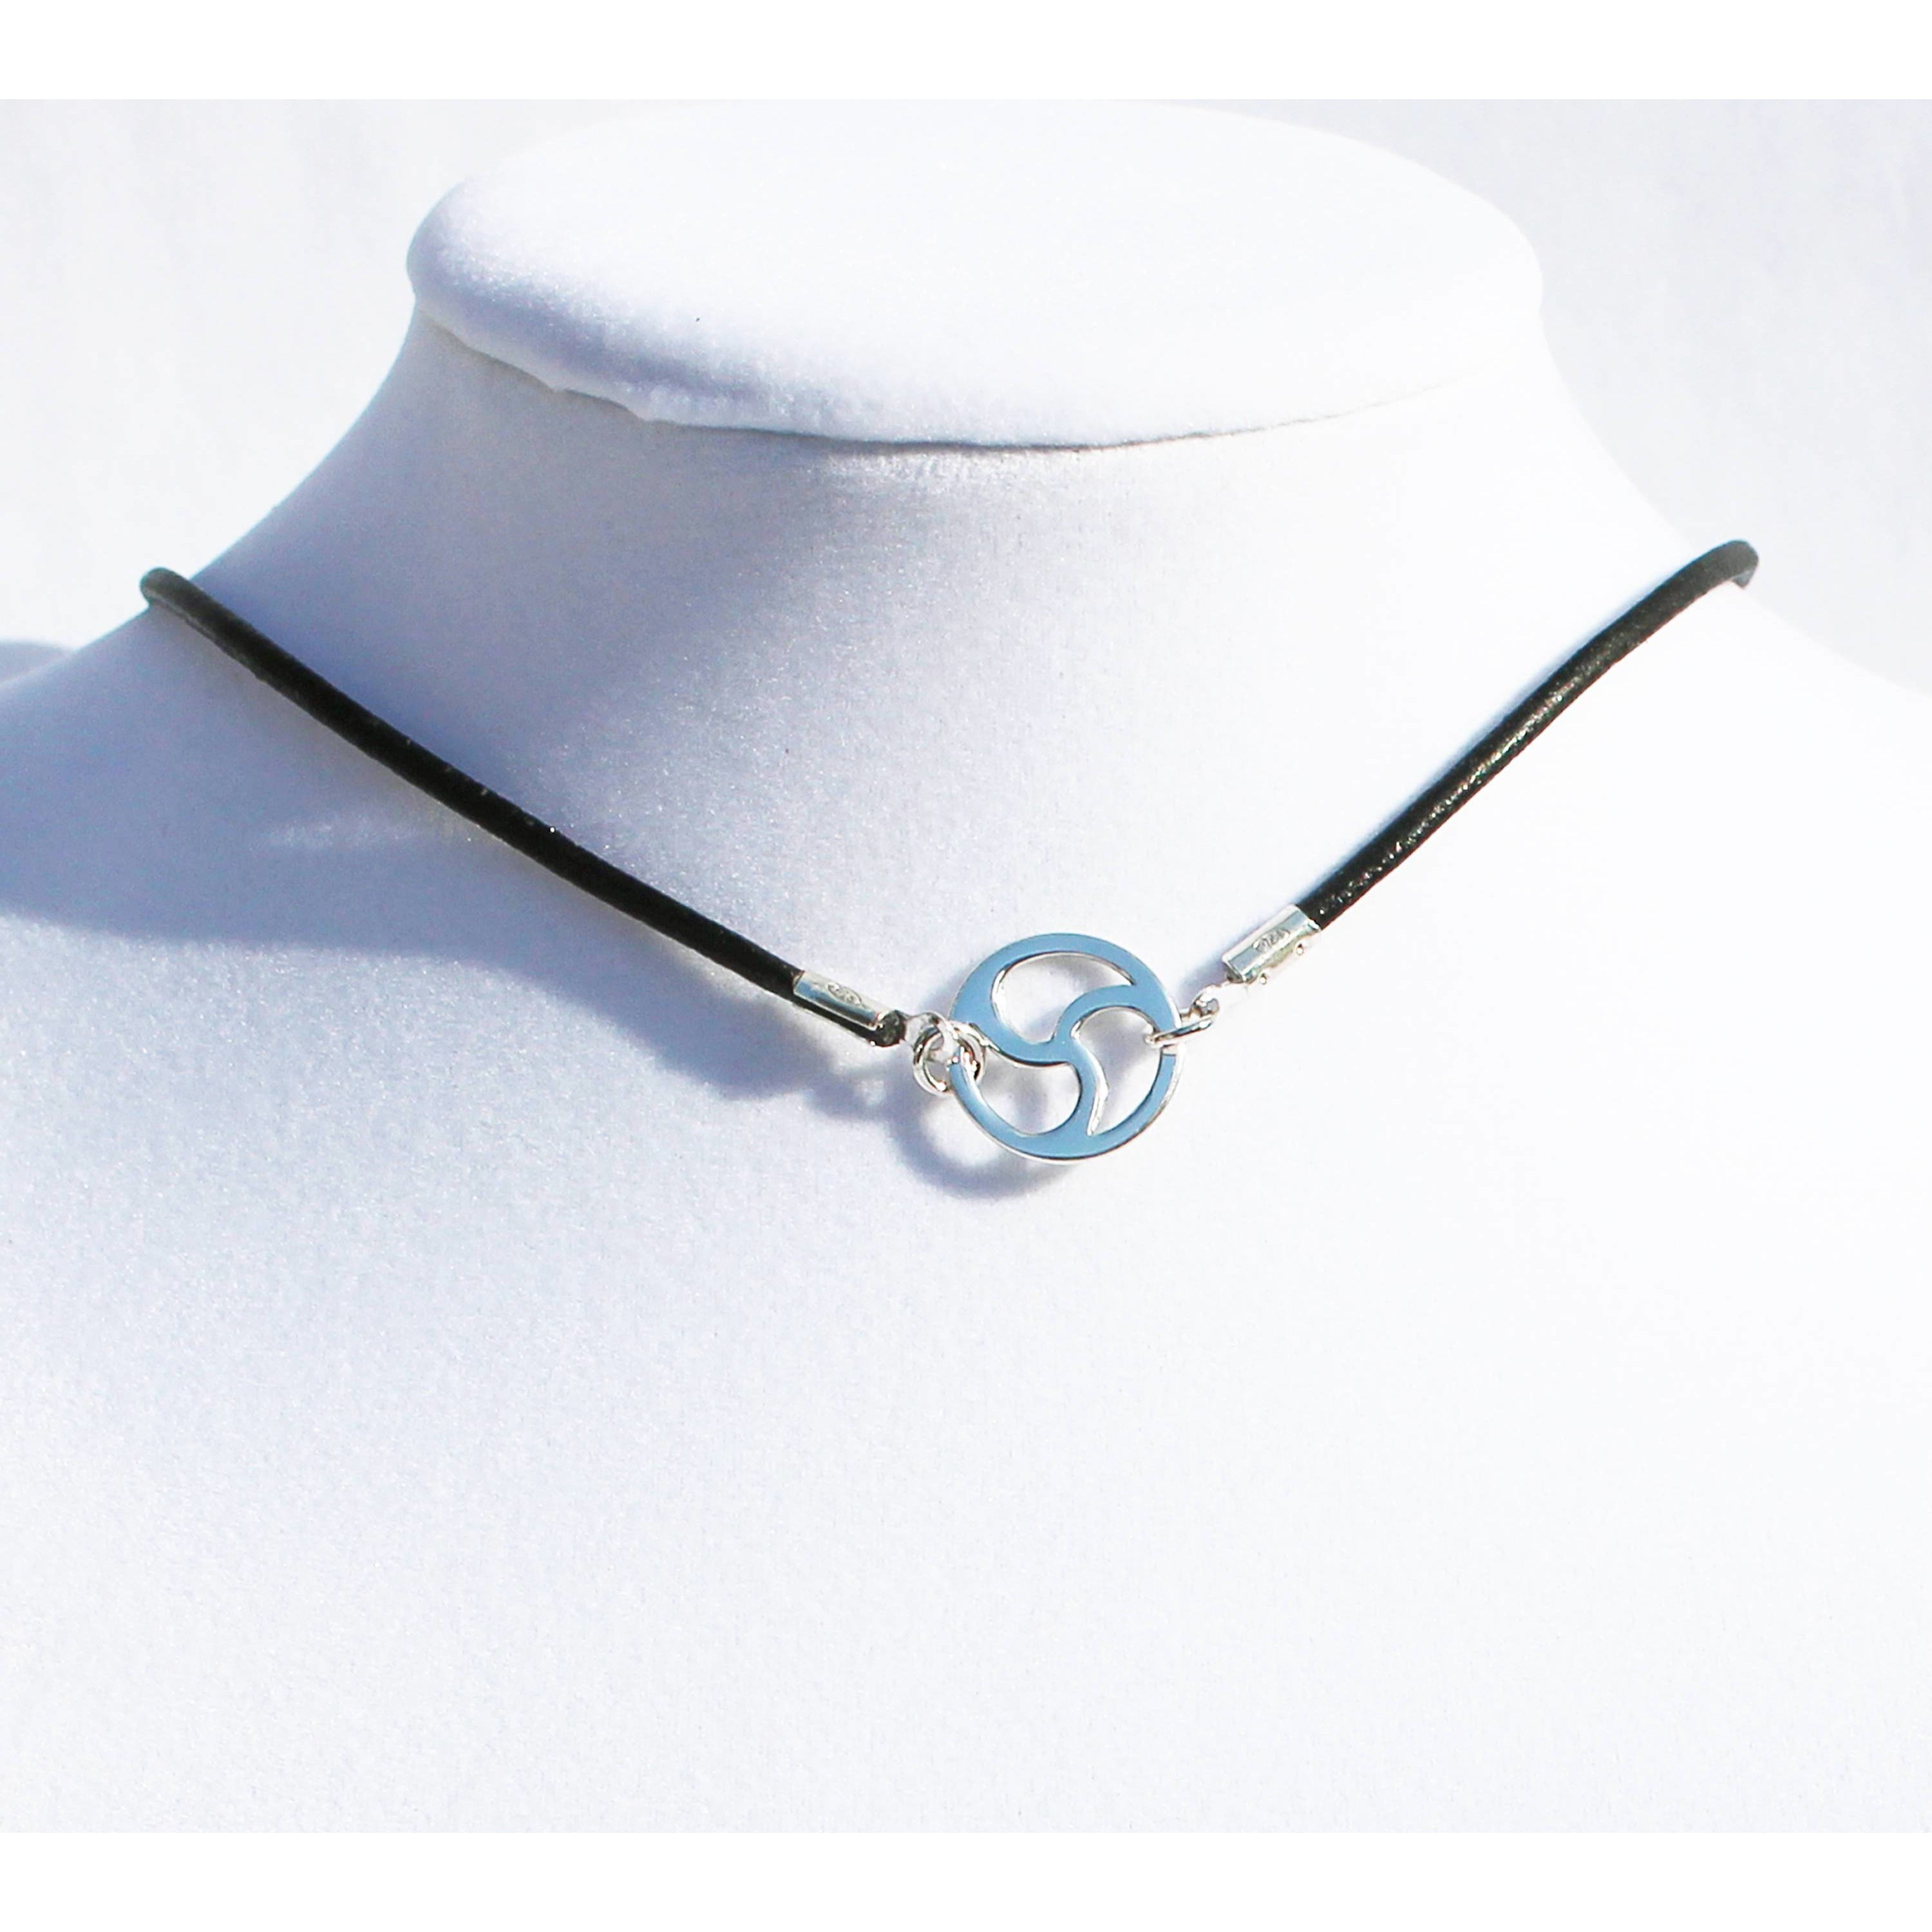 Discrete Day collar choker, Sterling Silver O Ring, Leather Cord, Unisex-Day Collar, Public Collar, Submissive Necklace